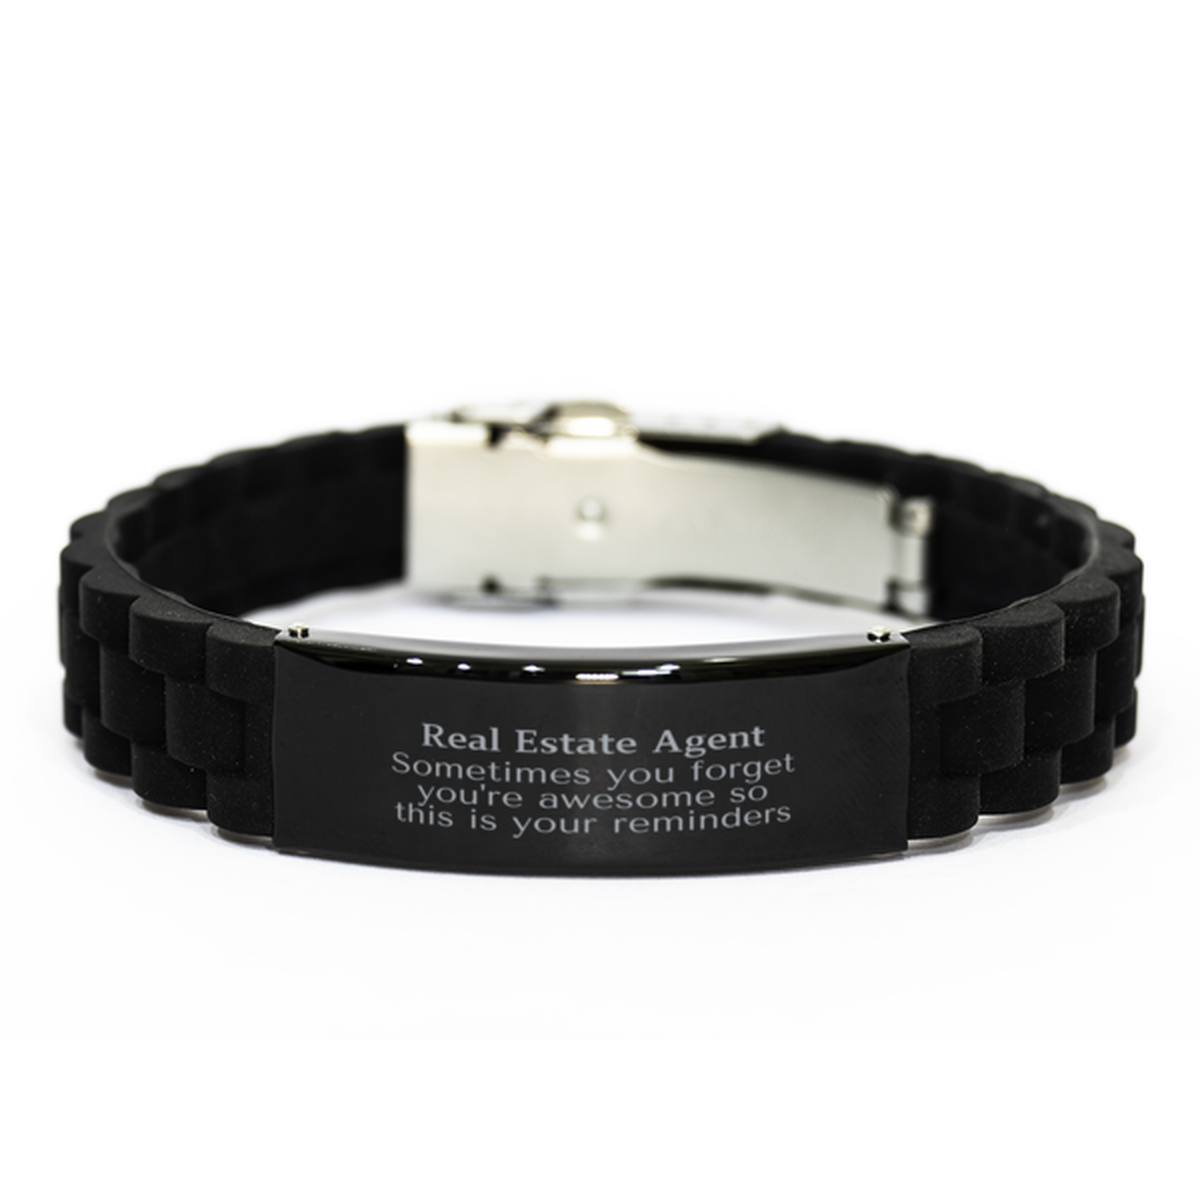 Sentimental Real Estate Agent Black Glidelock Clasp Bracelet, Real Estate Agent Sometimes you forget you're awesome so this is your reminders, Graduation Christmas Birthday Gifts for Real Estate Agent, Men, Women, Coworkers